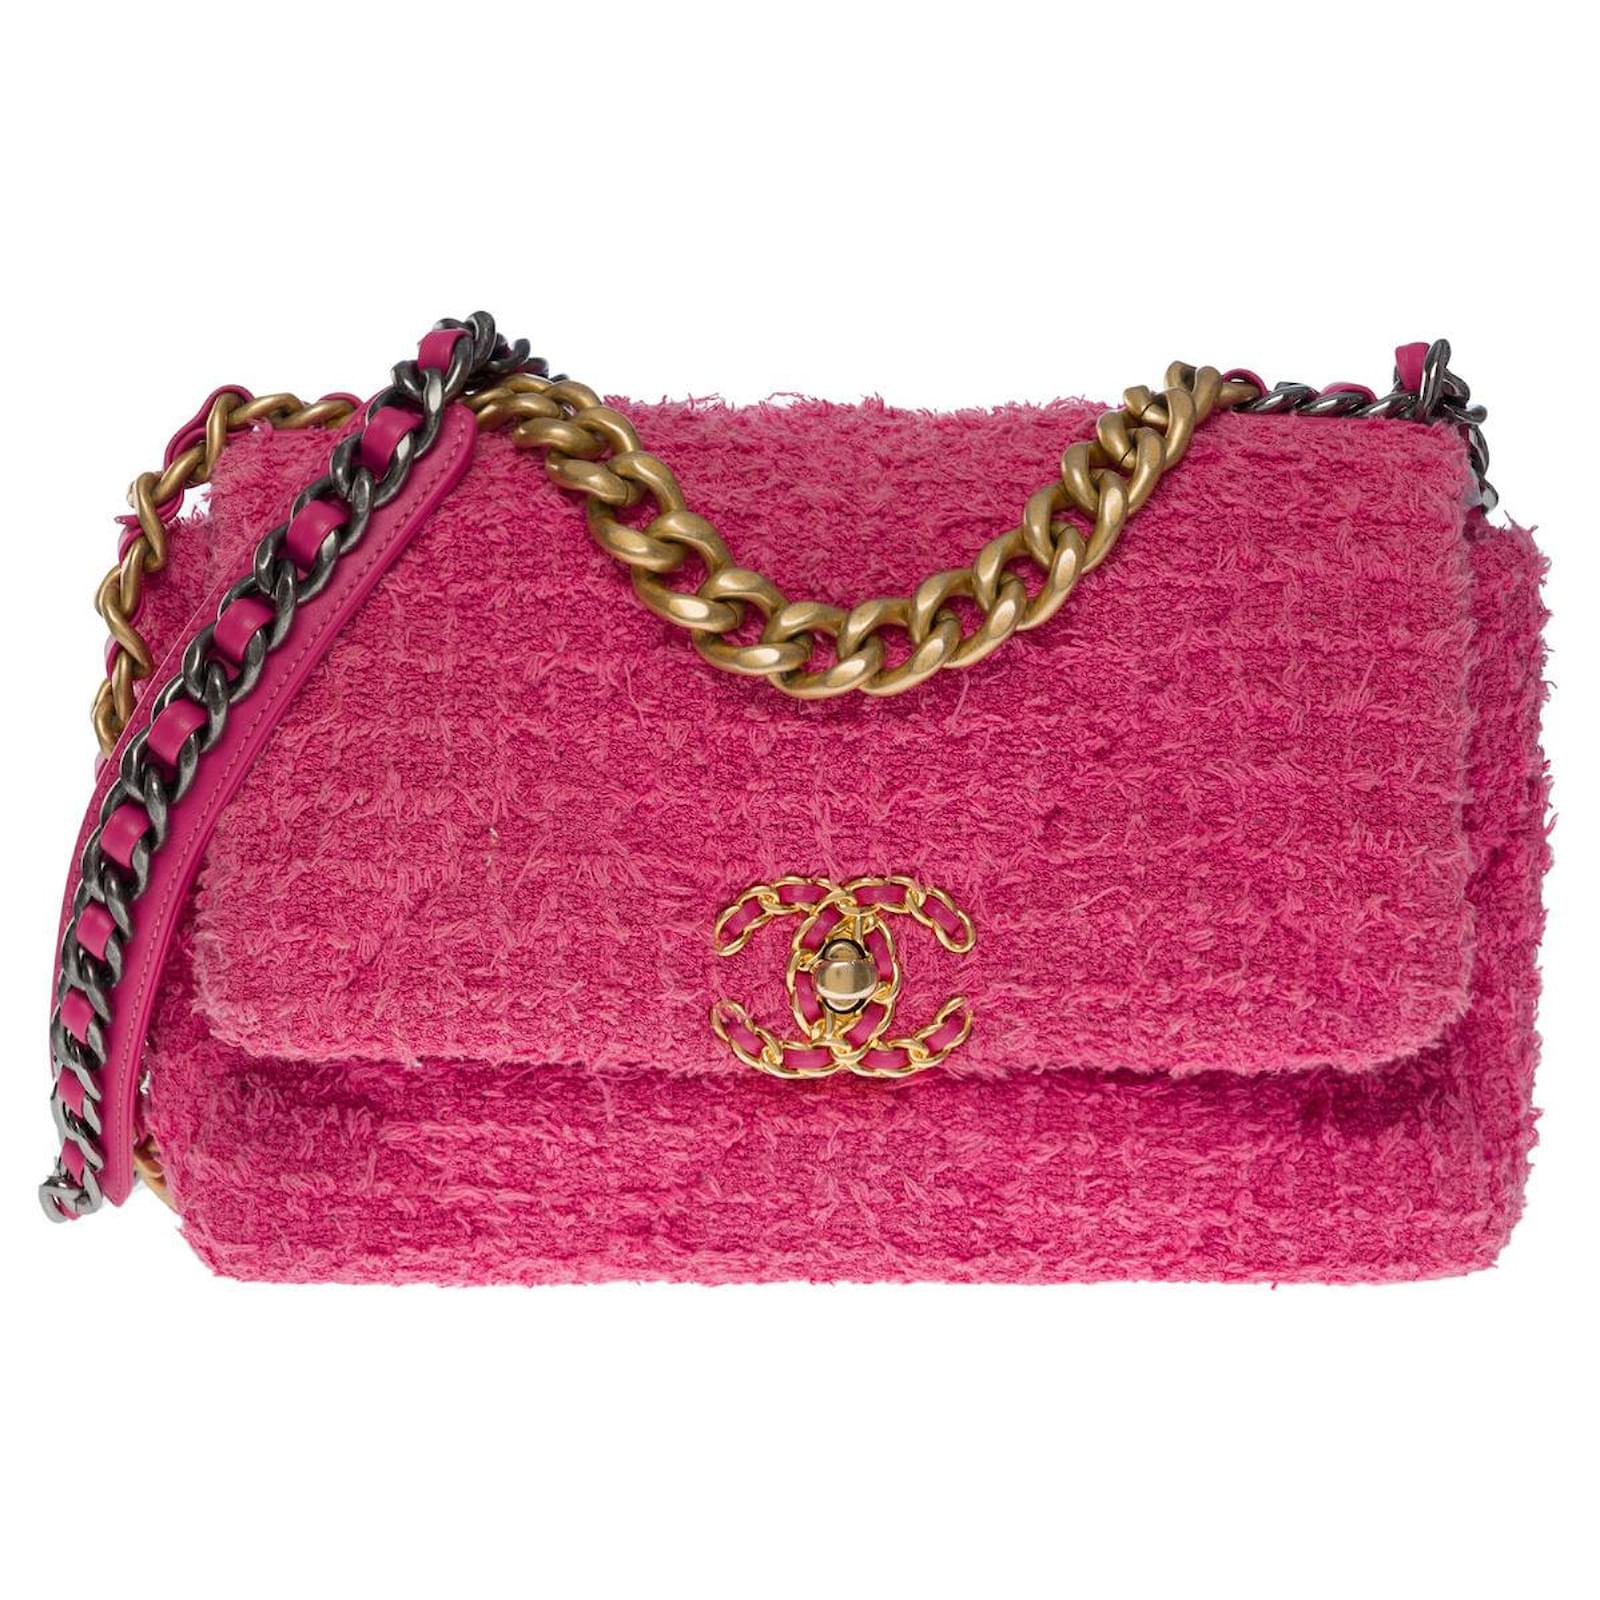 Misc Chanel Chanel Bag Chanel 19 in Pink Tweed - 101204